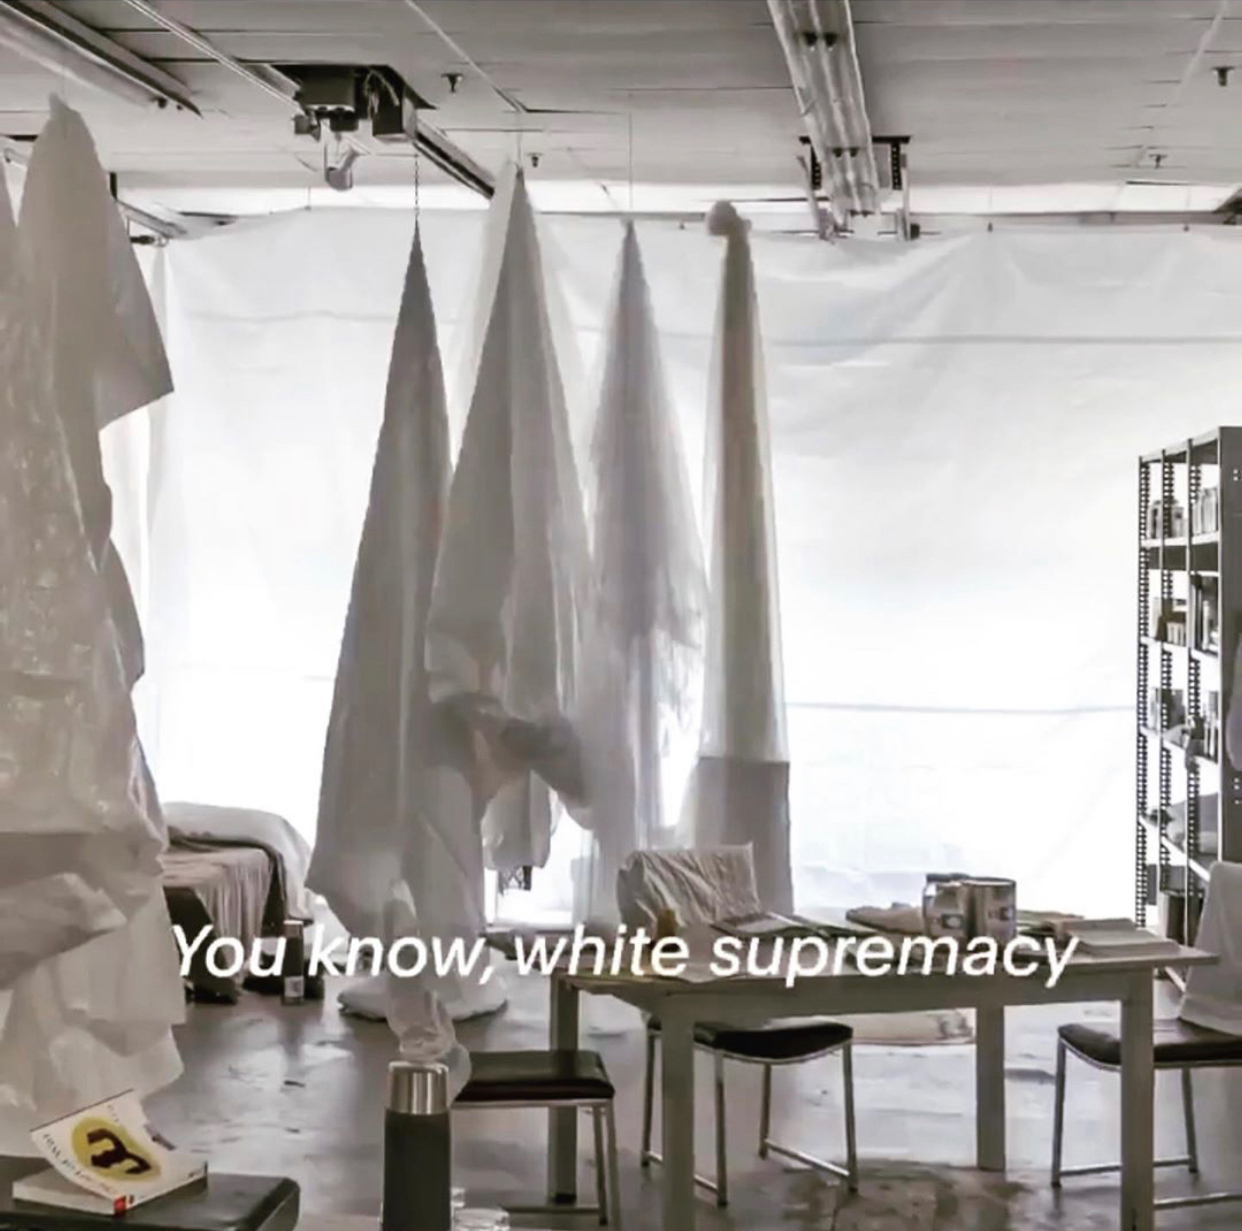 Antarctica art installation: sparse room wtih a table, chairs, bookshelf, hanging white shrouds and text "You know, white supremacy"